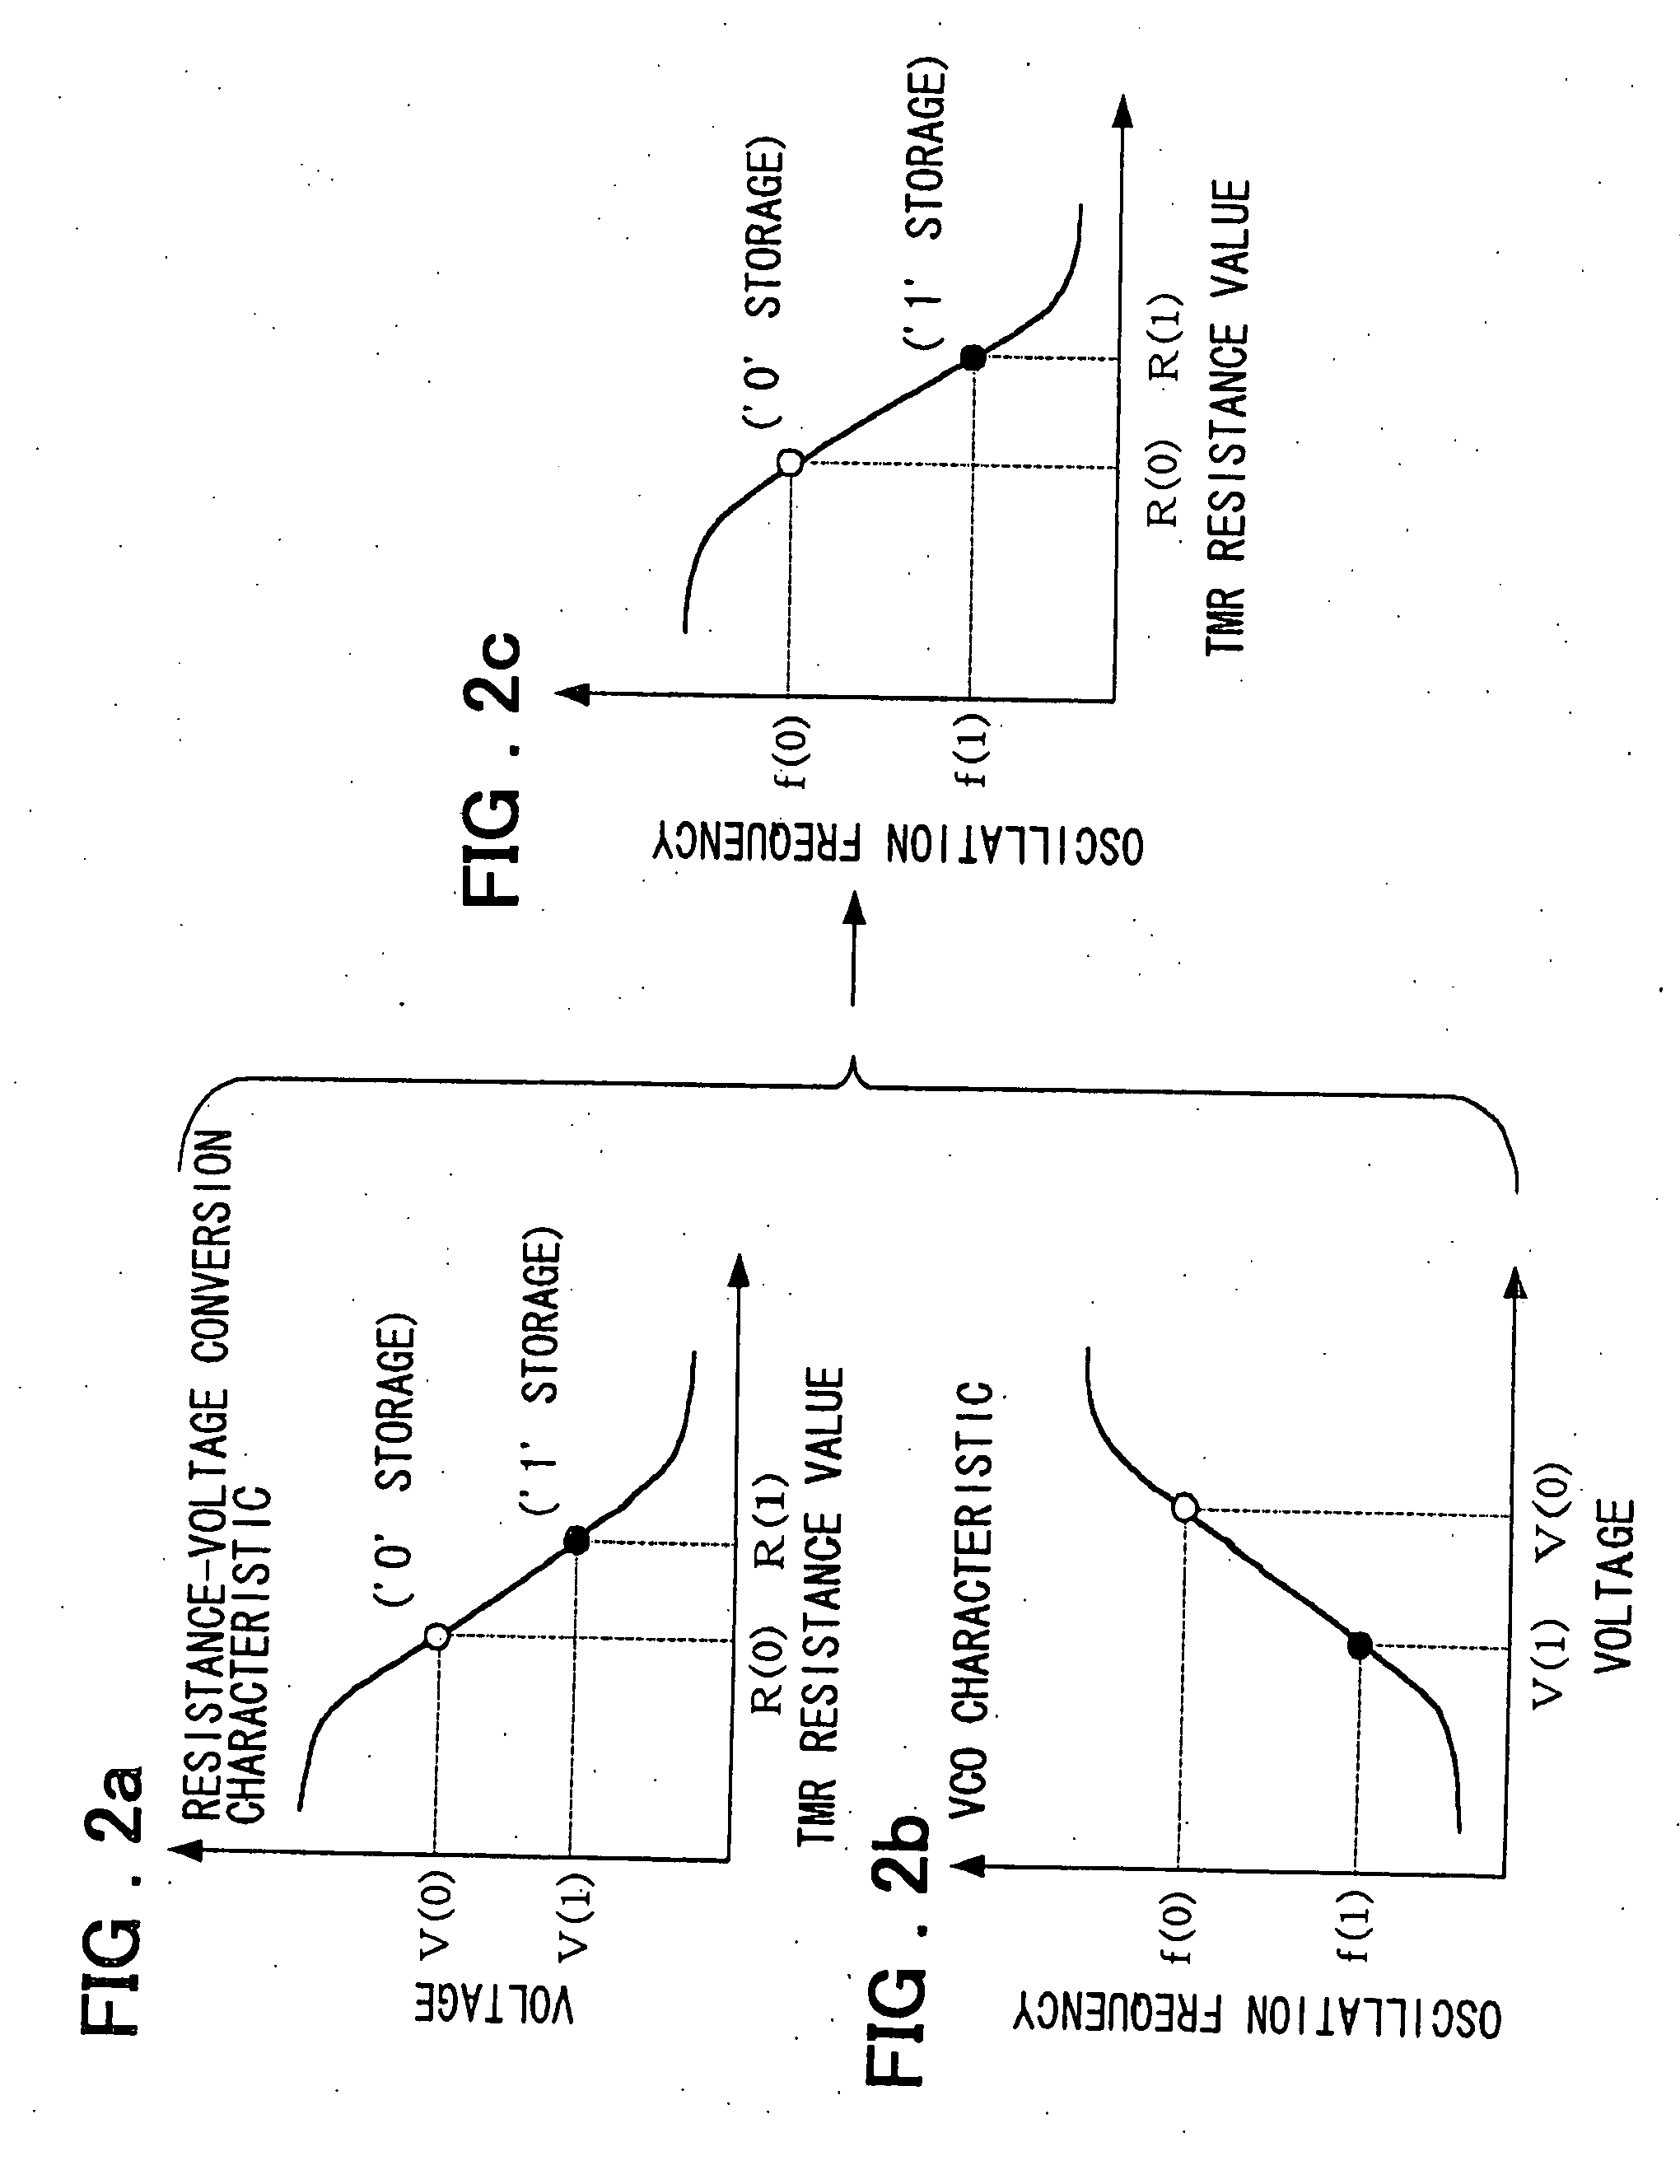 Readout circuit for semiconductor storage device